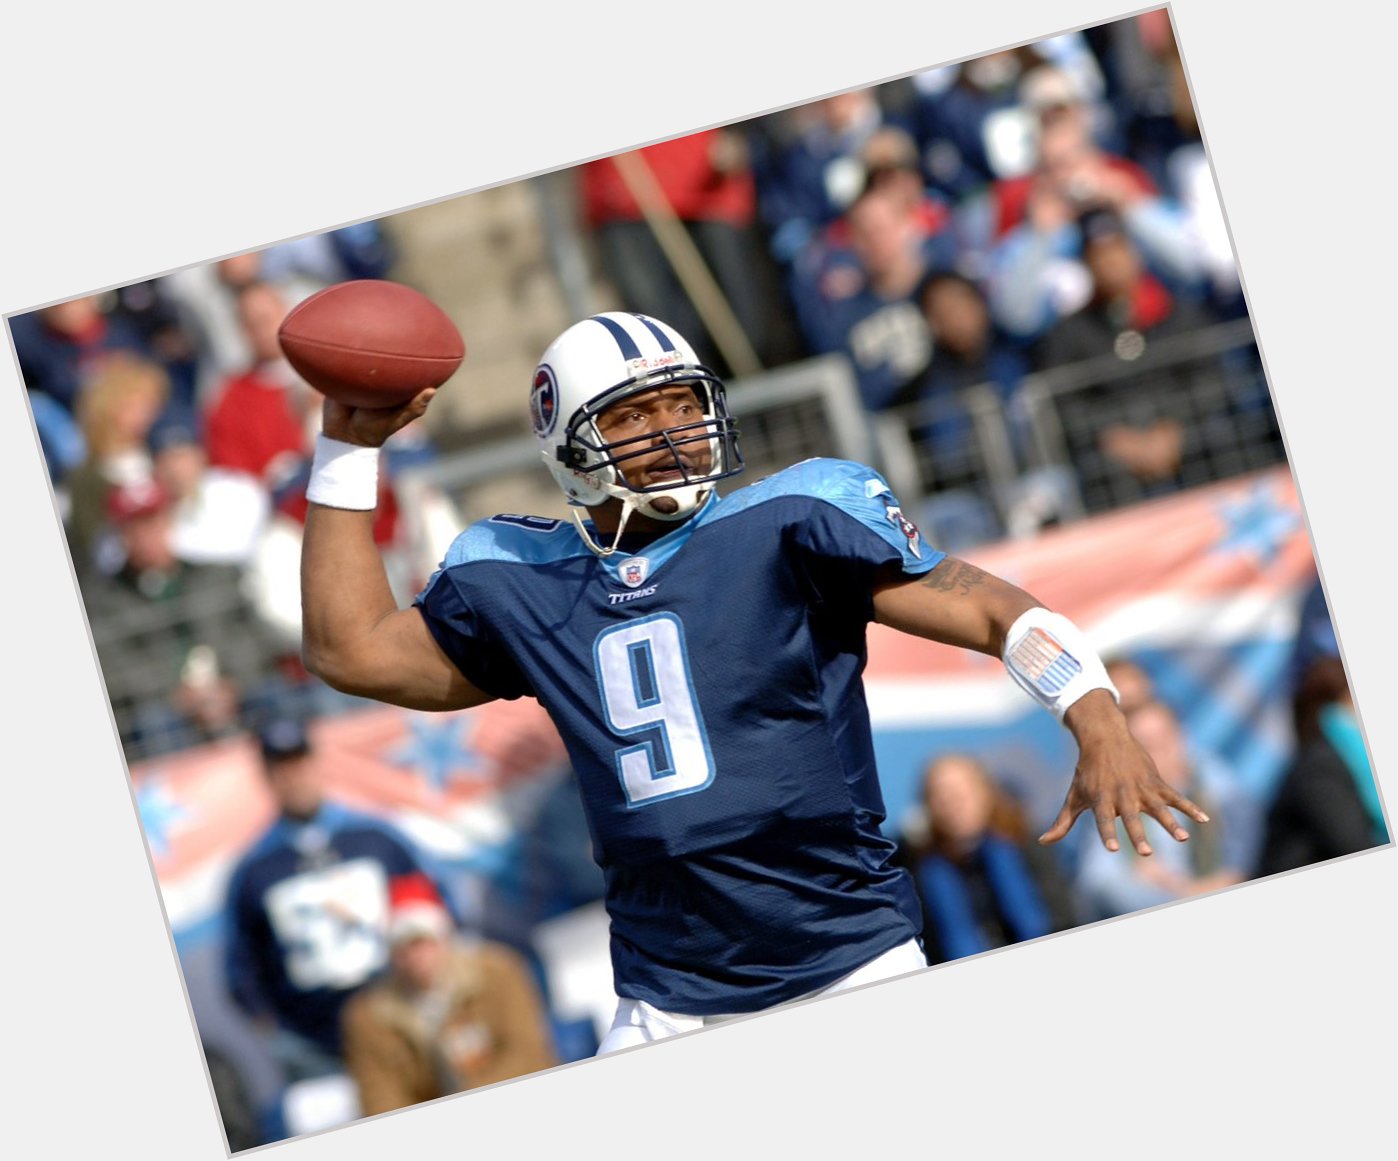 Happy Birthday to Steve McNair, who would have turned 45 today! 